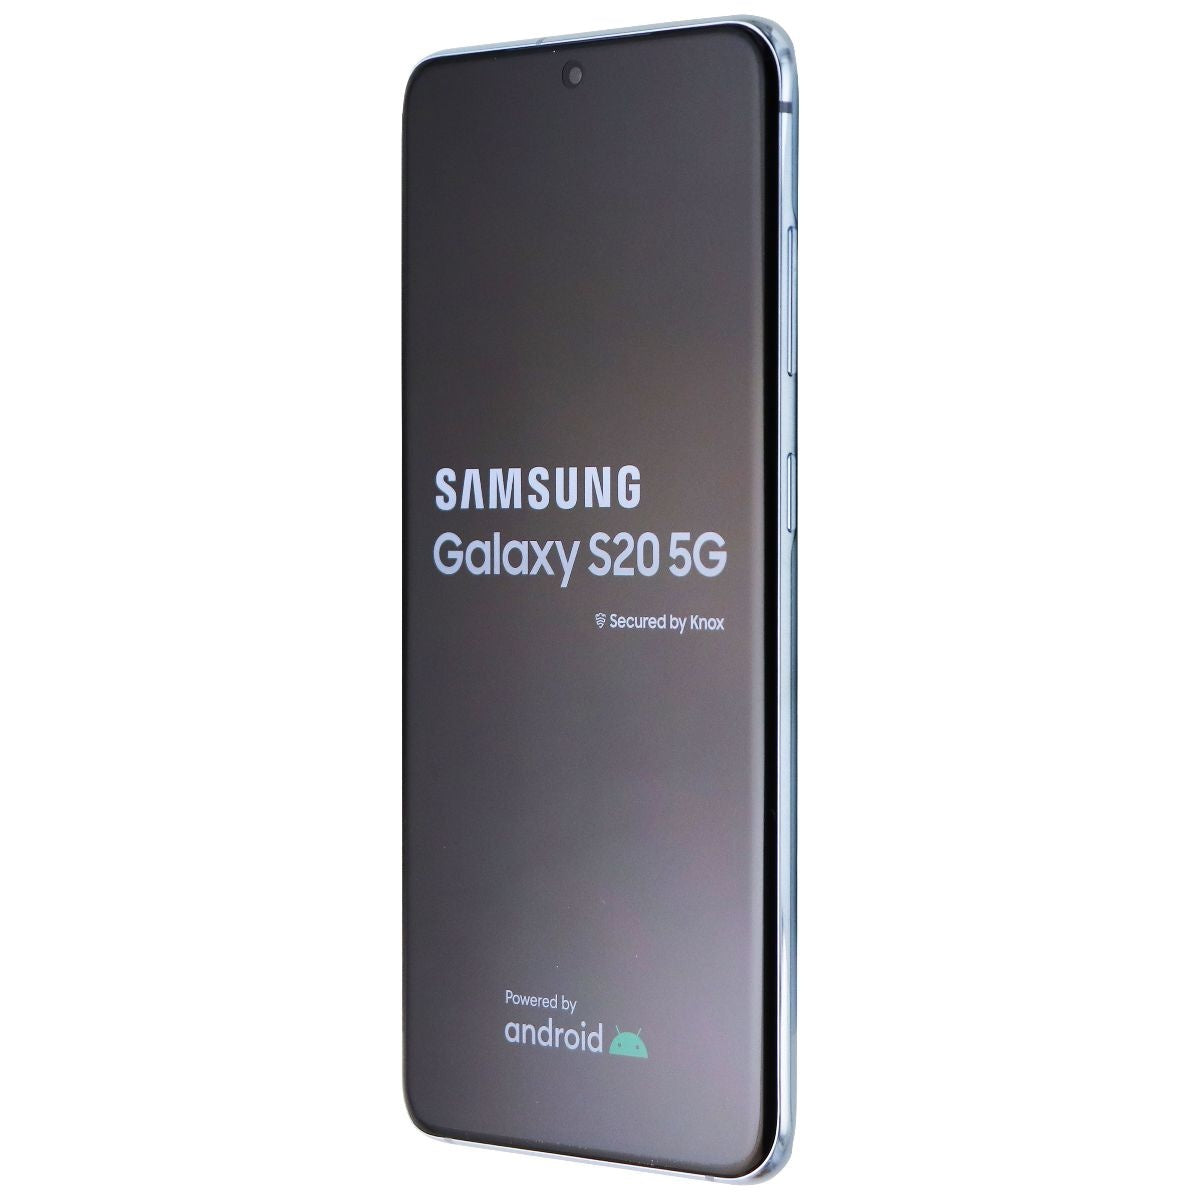 Samsung Galaxy S20 5G for T-Mobile Customers